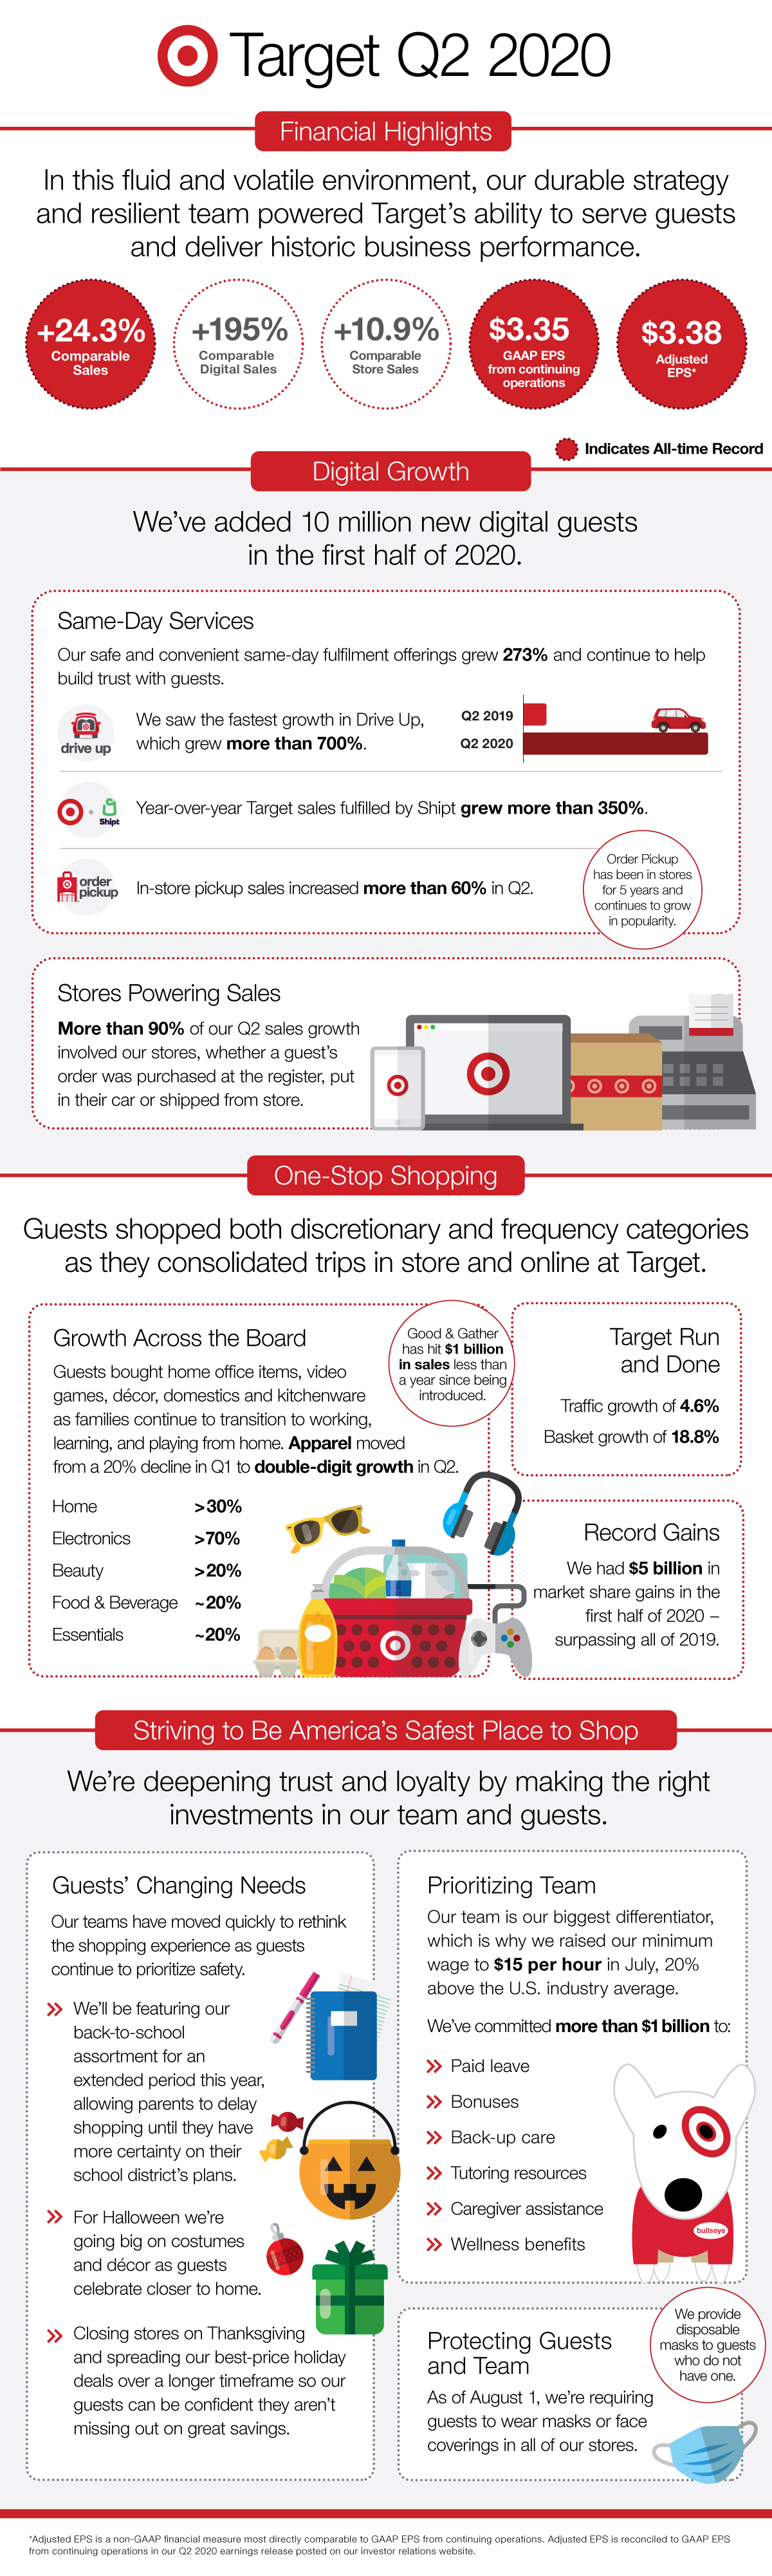 An infographic featuring highlights from Target's second quarter 2020. It features red and black text on white background with graphs and illustrations throughout.